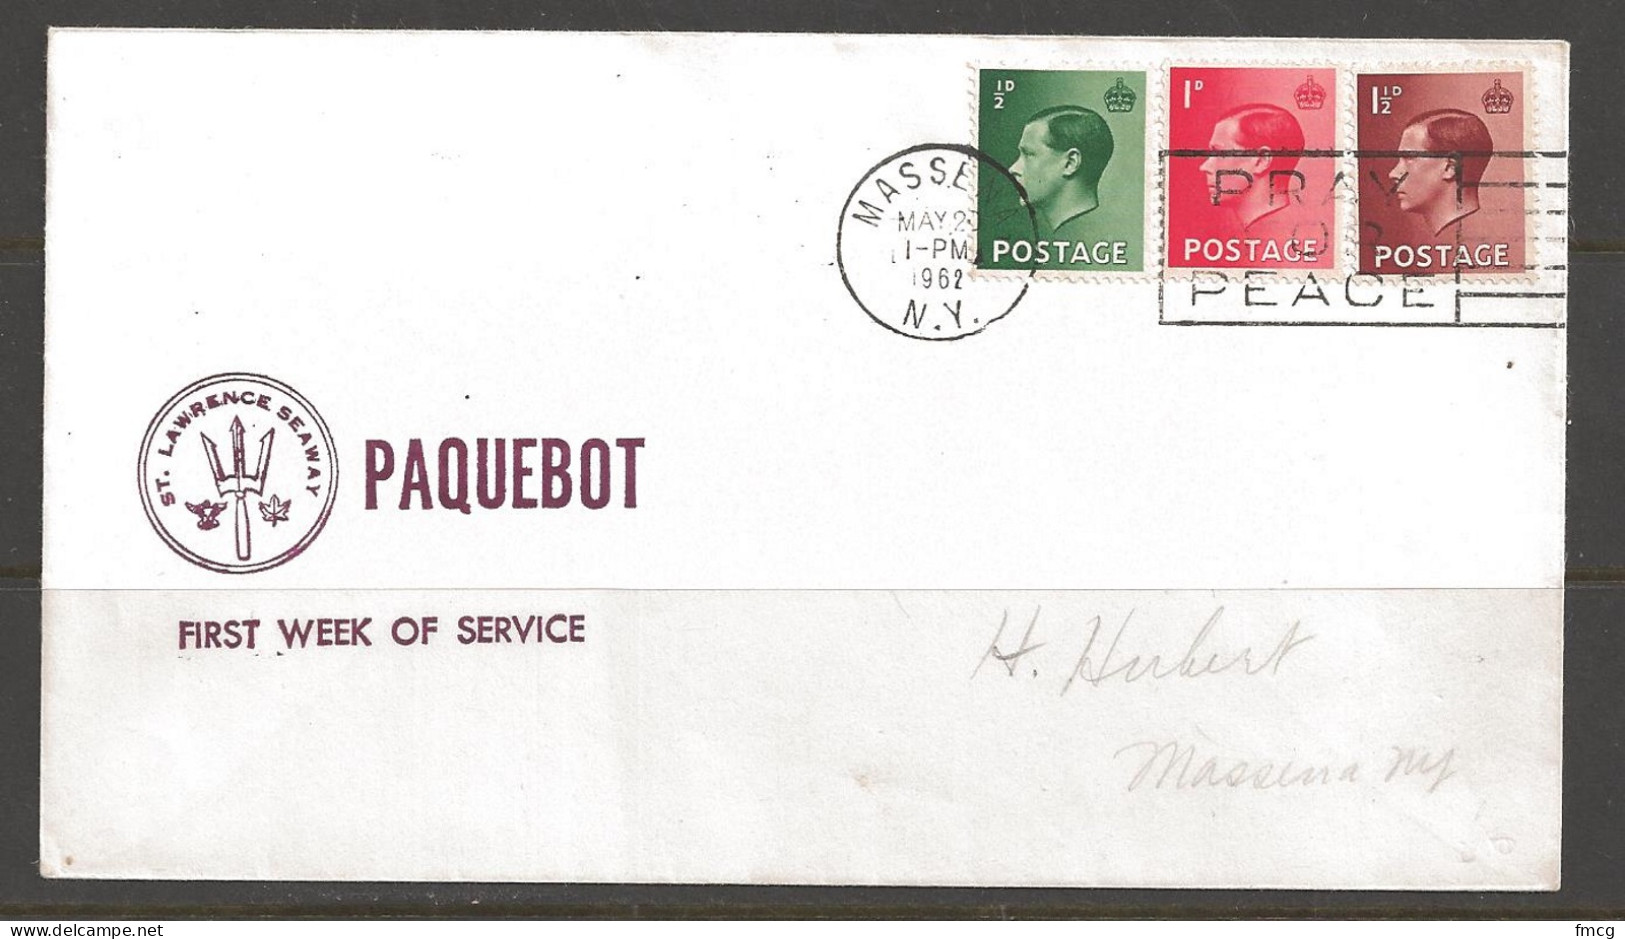 1962 Paquebot Cover British Stamps Used In Masenna, New York (May 20) - Covers & Documents